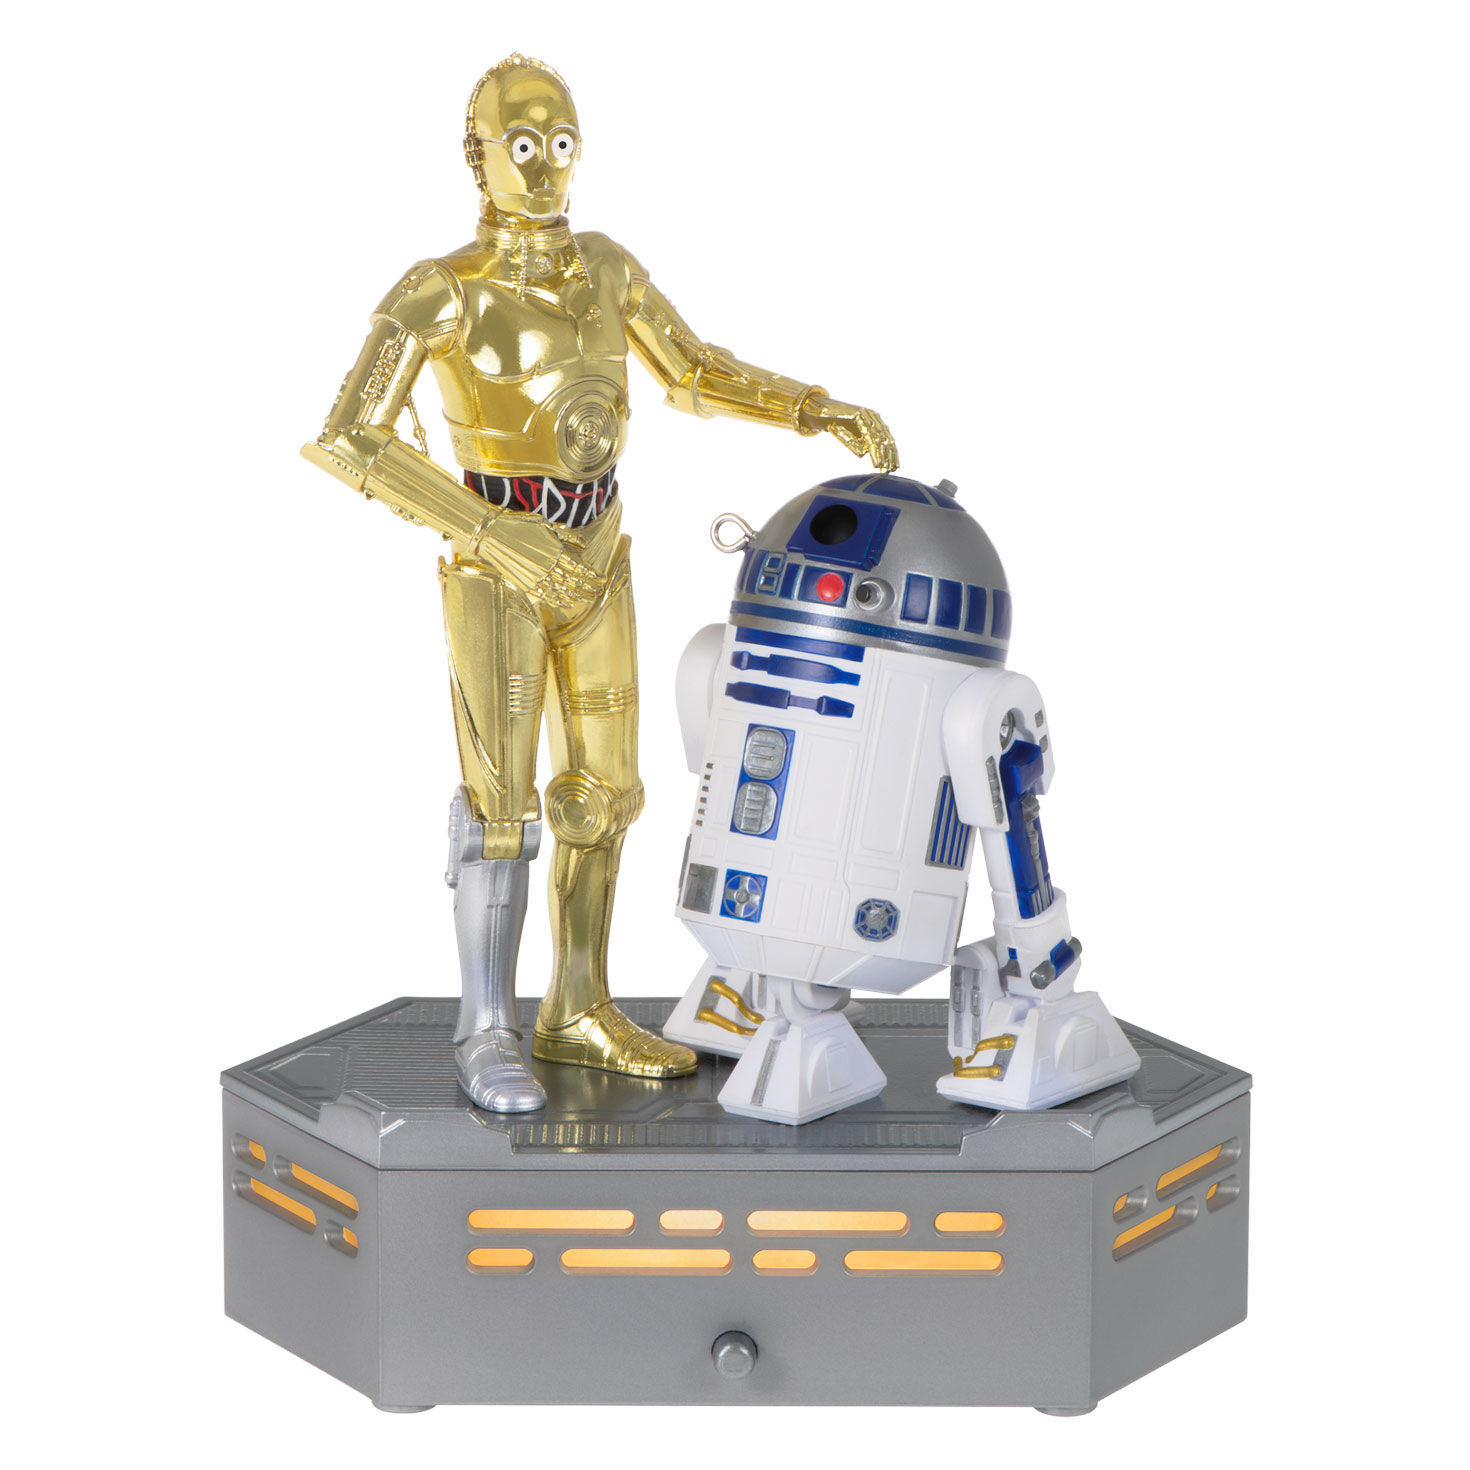 Hasbro Star Wars Holiday Edition R2-D2 and C-3PO Action Figure for sale online 